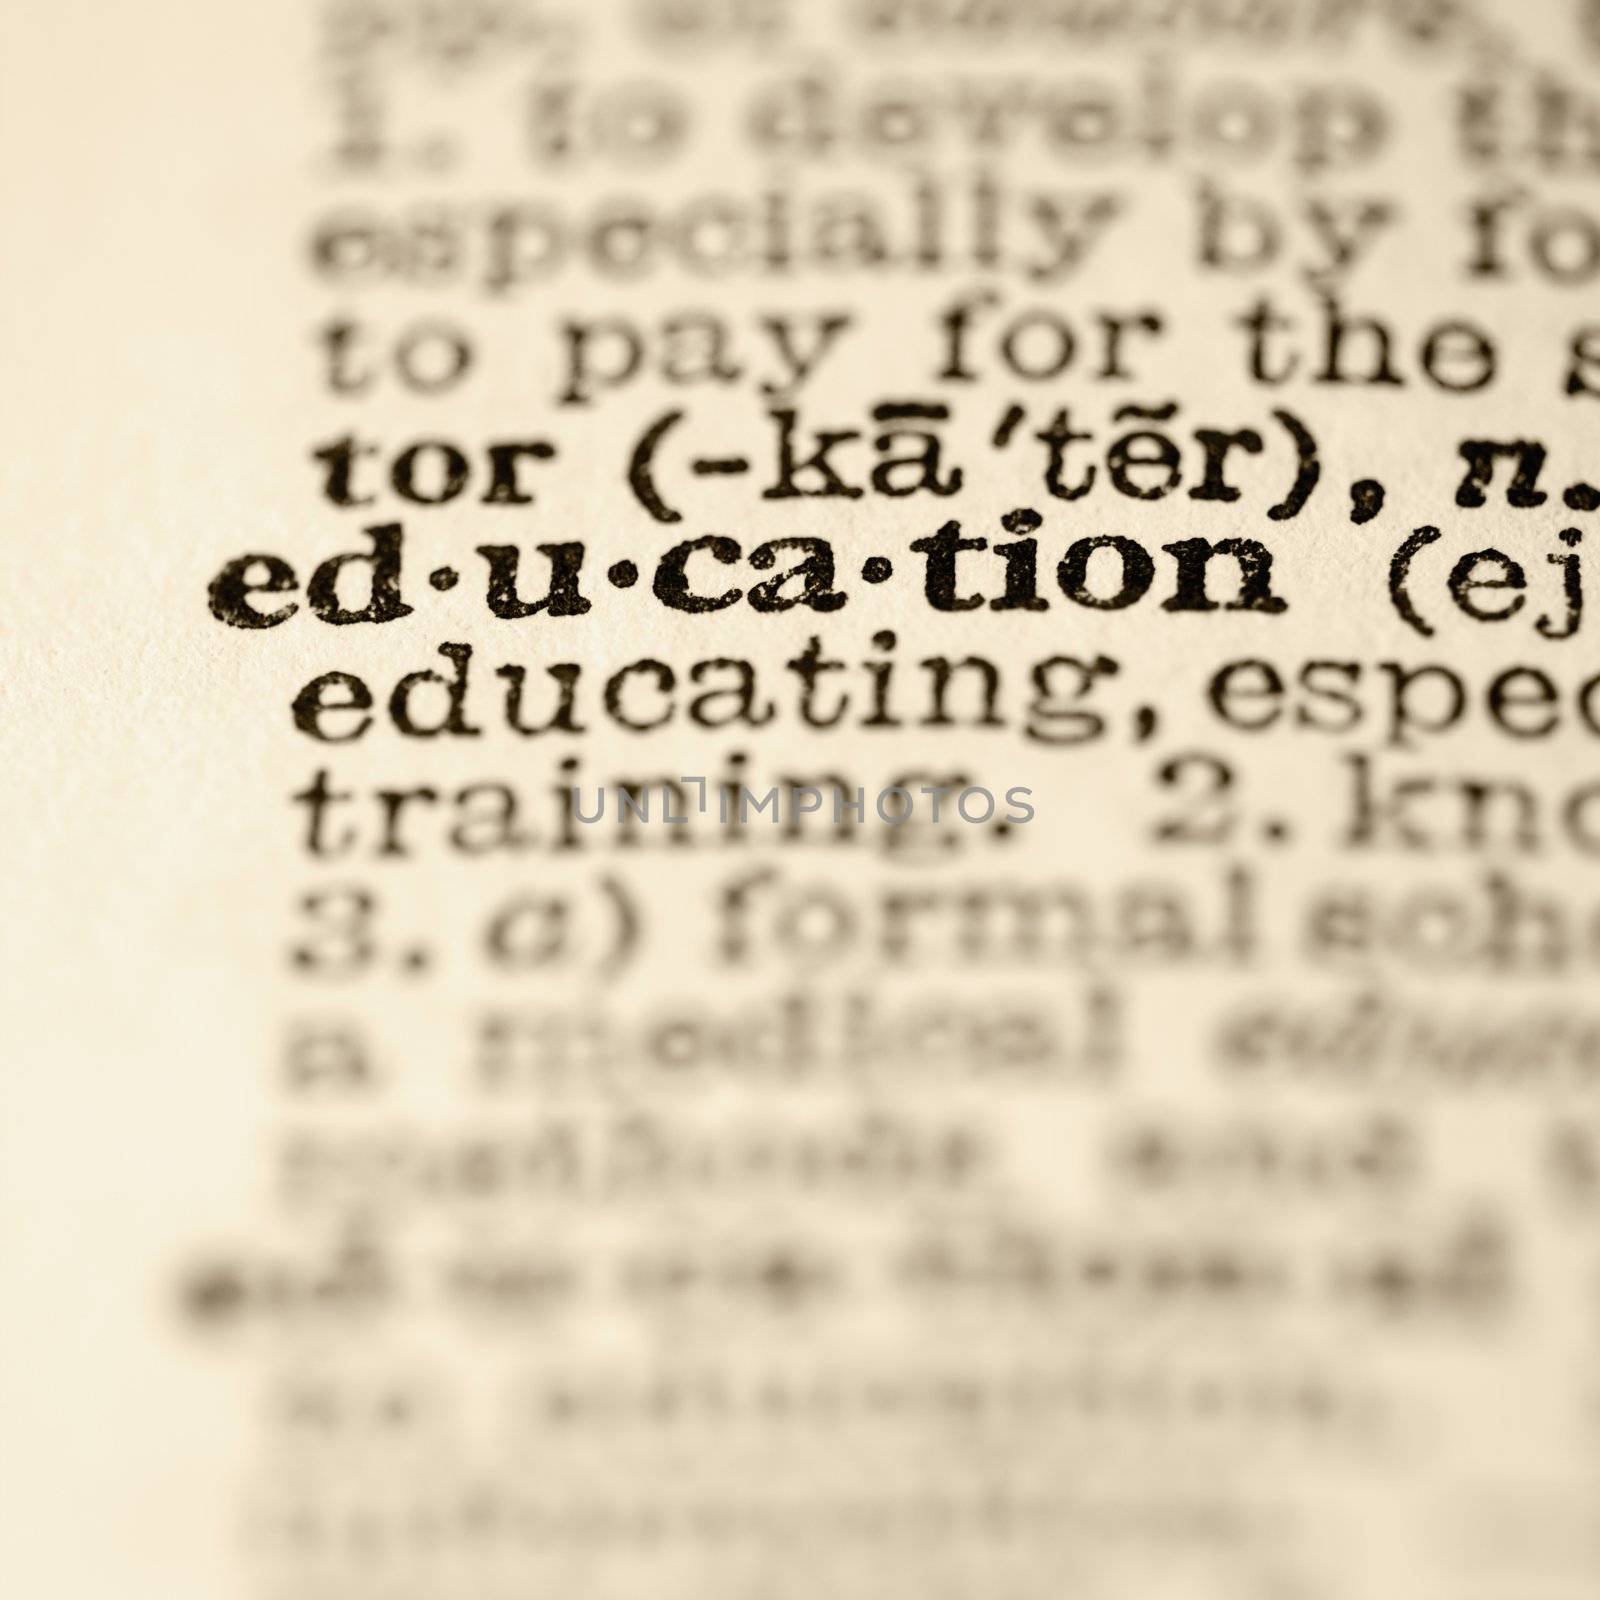 Education dictionary entry. by iofoto